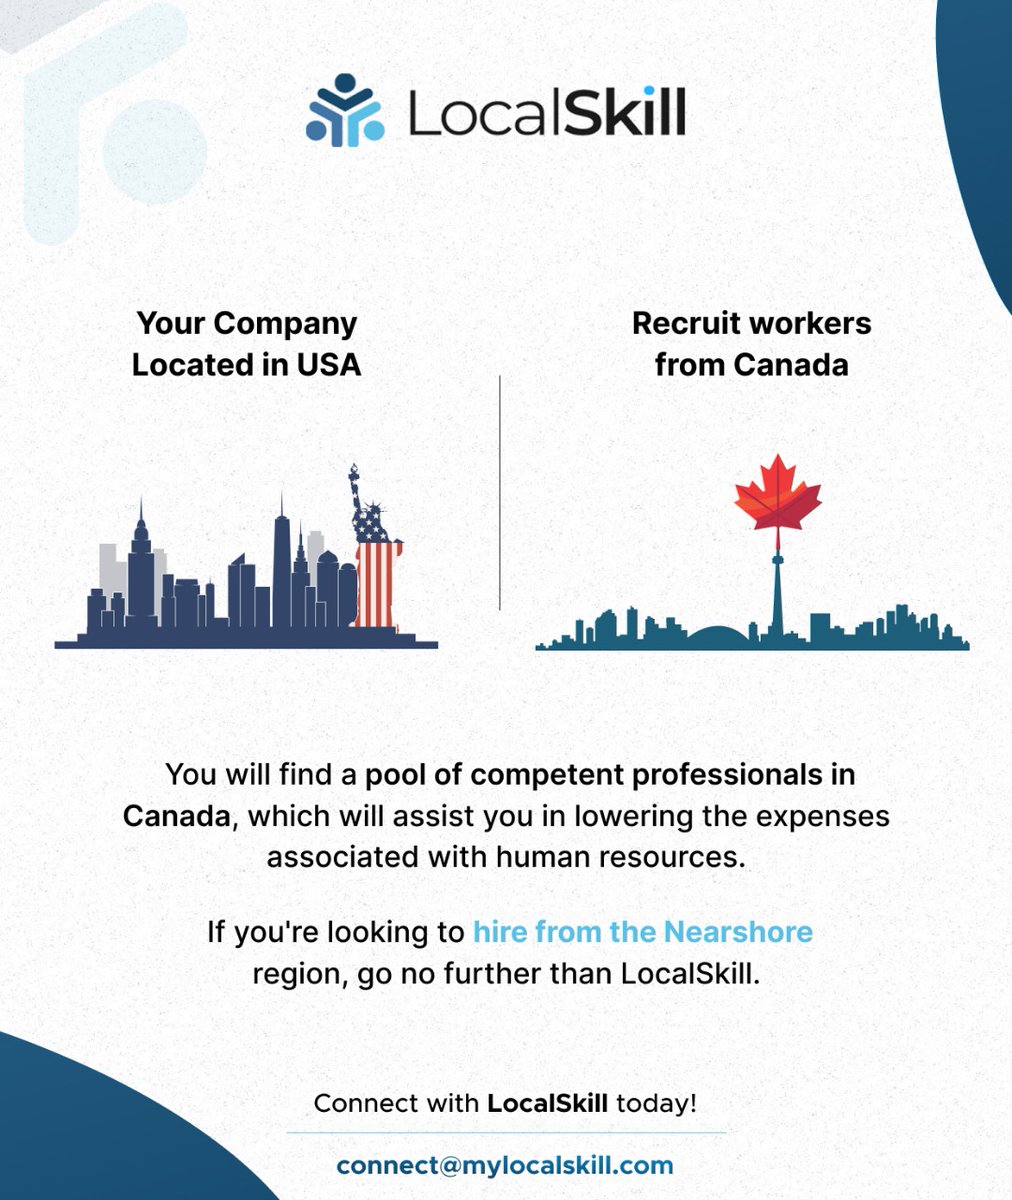 #IT #ITJobs #ITSpecialist #ITExperts #ITstaffing #developers #ITServices #ITRecruiters #ITprofessionals #Engineering #manufacturing #Automative #Accounting #Recruiters #Recruiting #hiring #staffing #Recruitment #Employment #Canada 🇨🇦 #USA 🇺🇸
Visit: mylocalskill.com